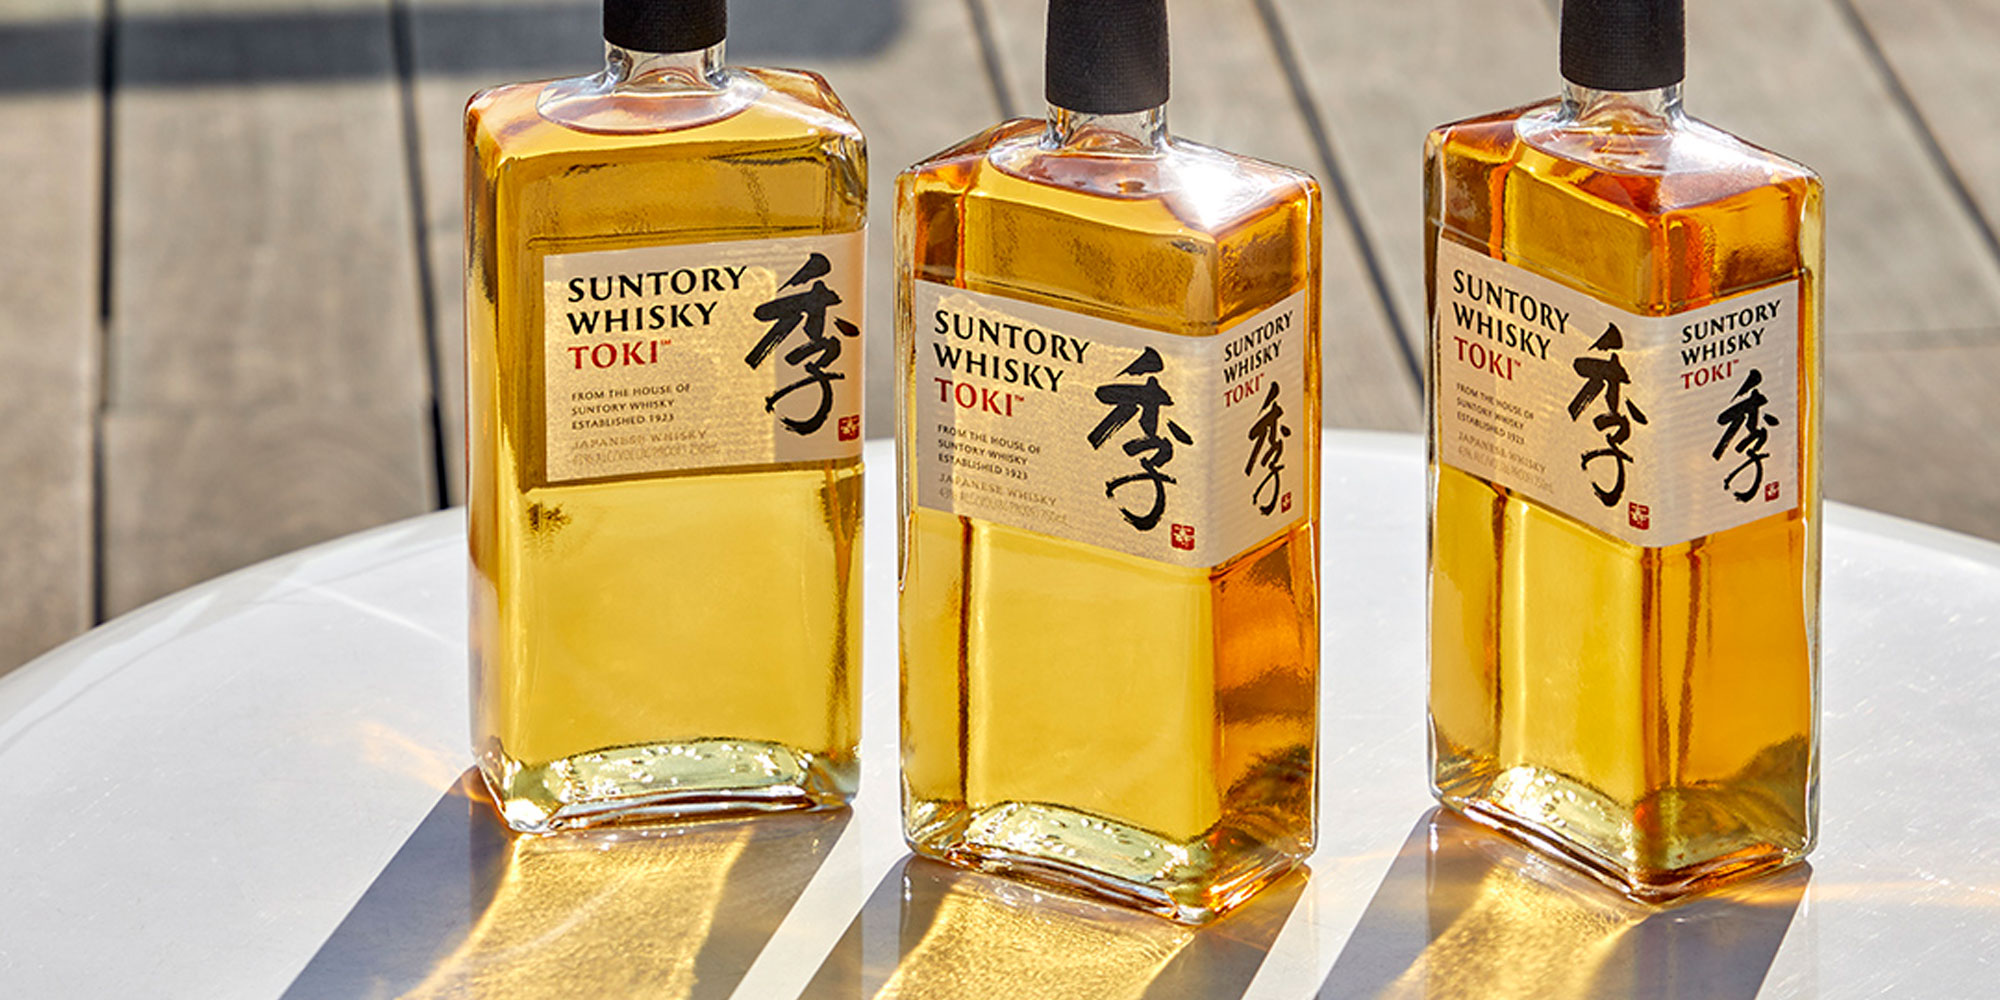 Old Best With Japanese Modernity of Blends | Whisky World VinePair the Toki® the